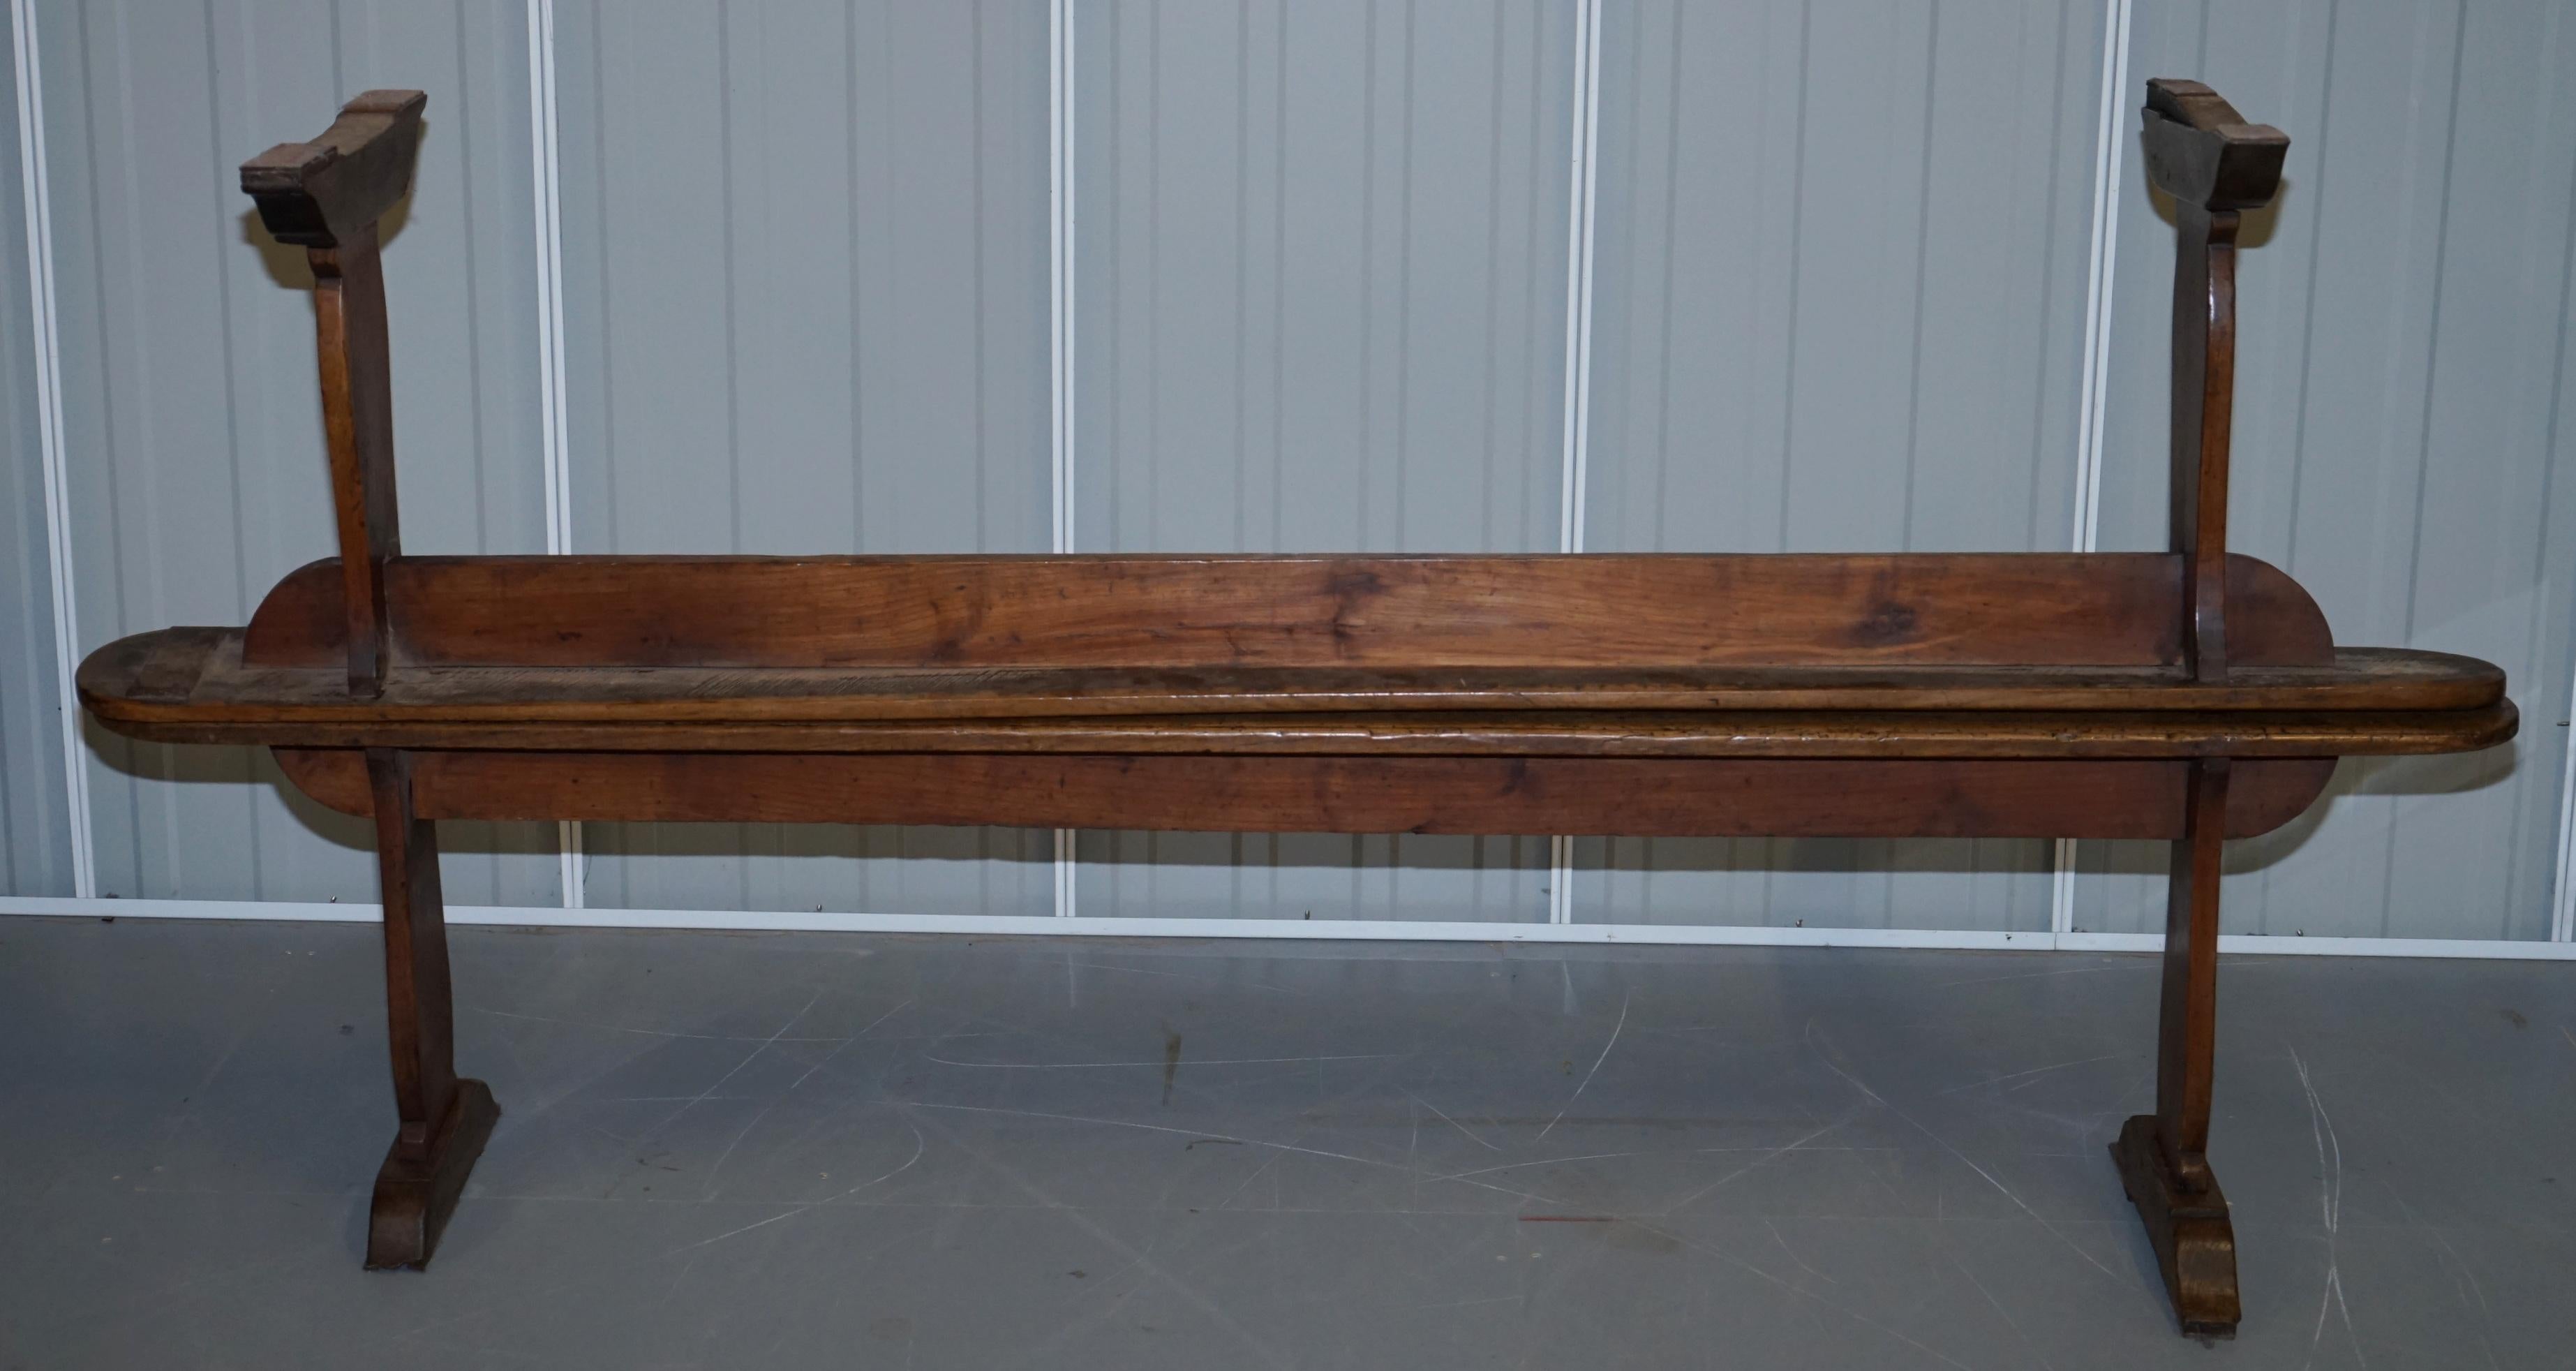 PAIR OF CIRCA 1800 FRENCH PROVINCIAL FRUITWOOD 2 METER REFECTORY TABLE BENCHEs 2